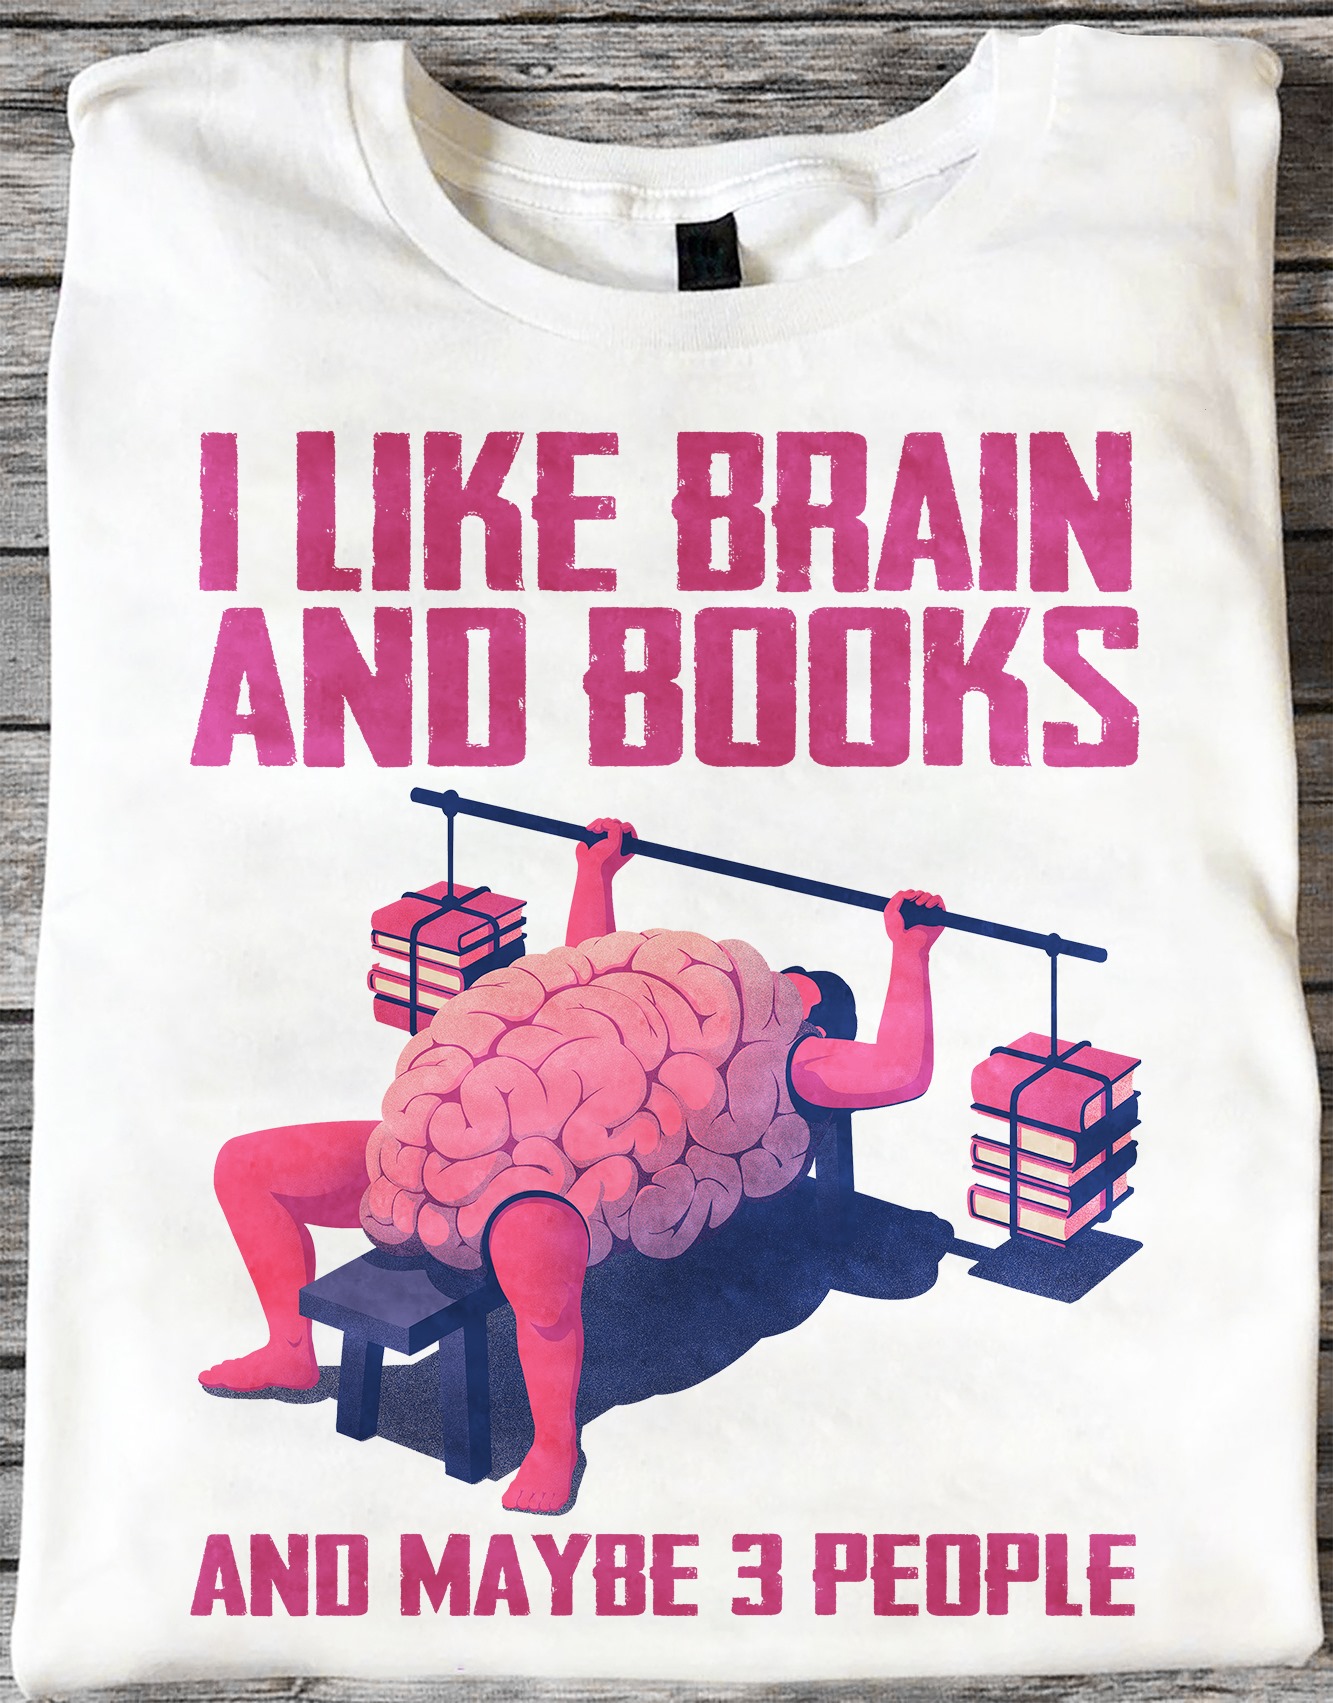 I like brain and books and maybe 3 people - Brain lifting, training for brain, gift for bookaholic